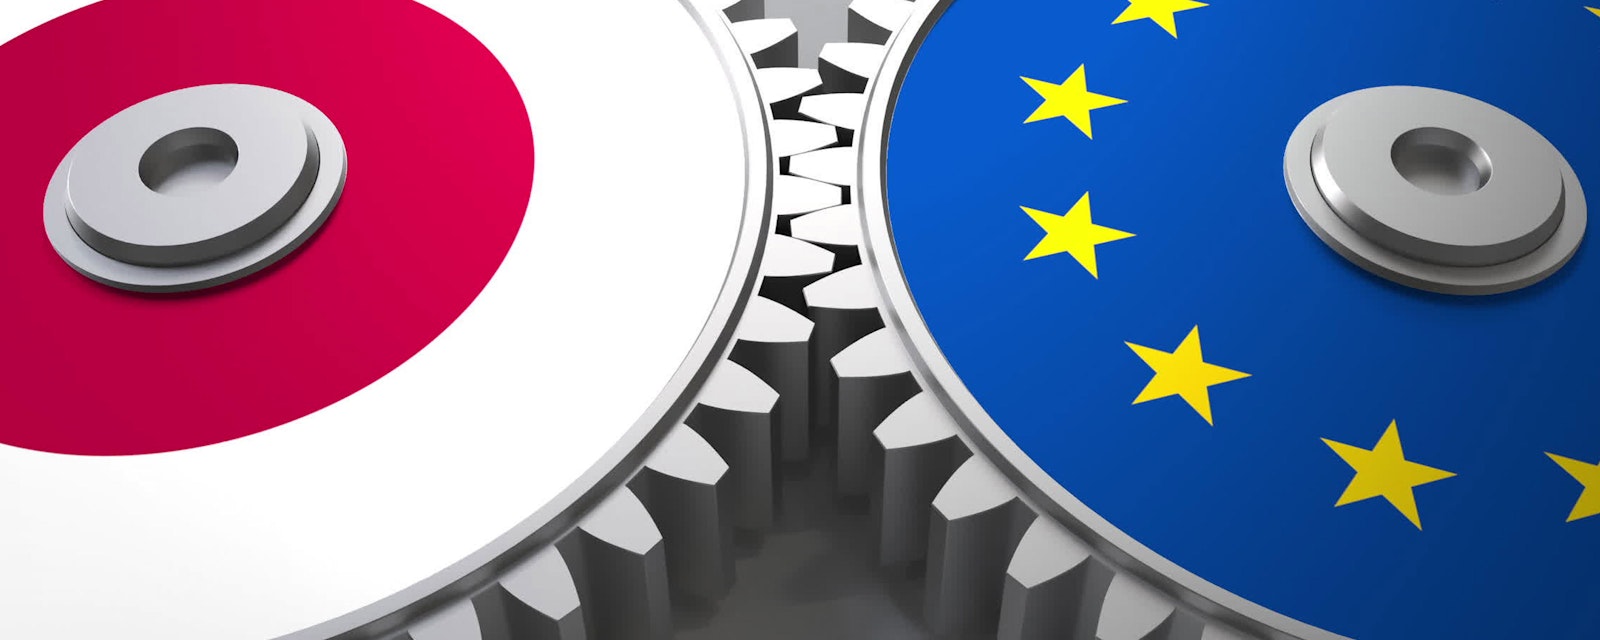 EUJapan–JEEPA-Deepens-Economic-and-Political-Ties-Amid-Tensions-With-the-US